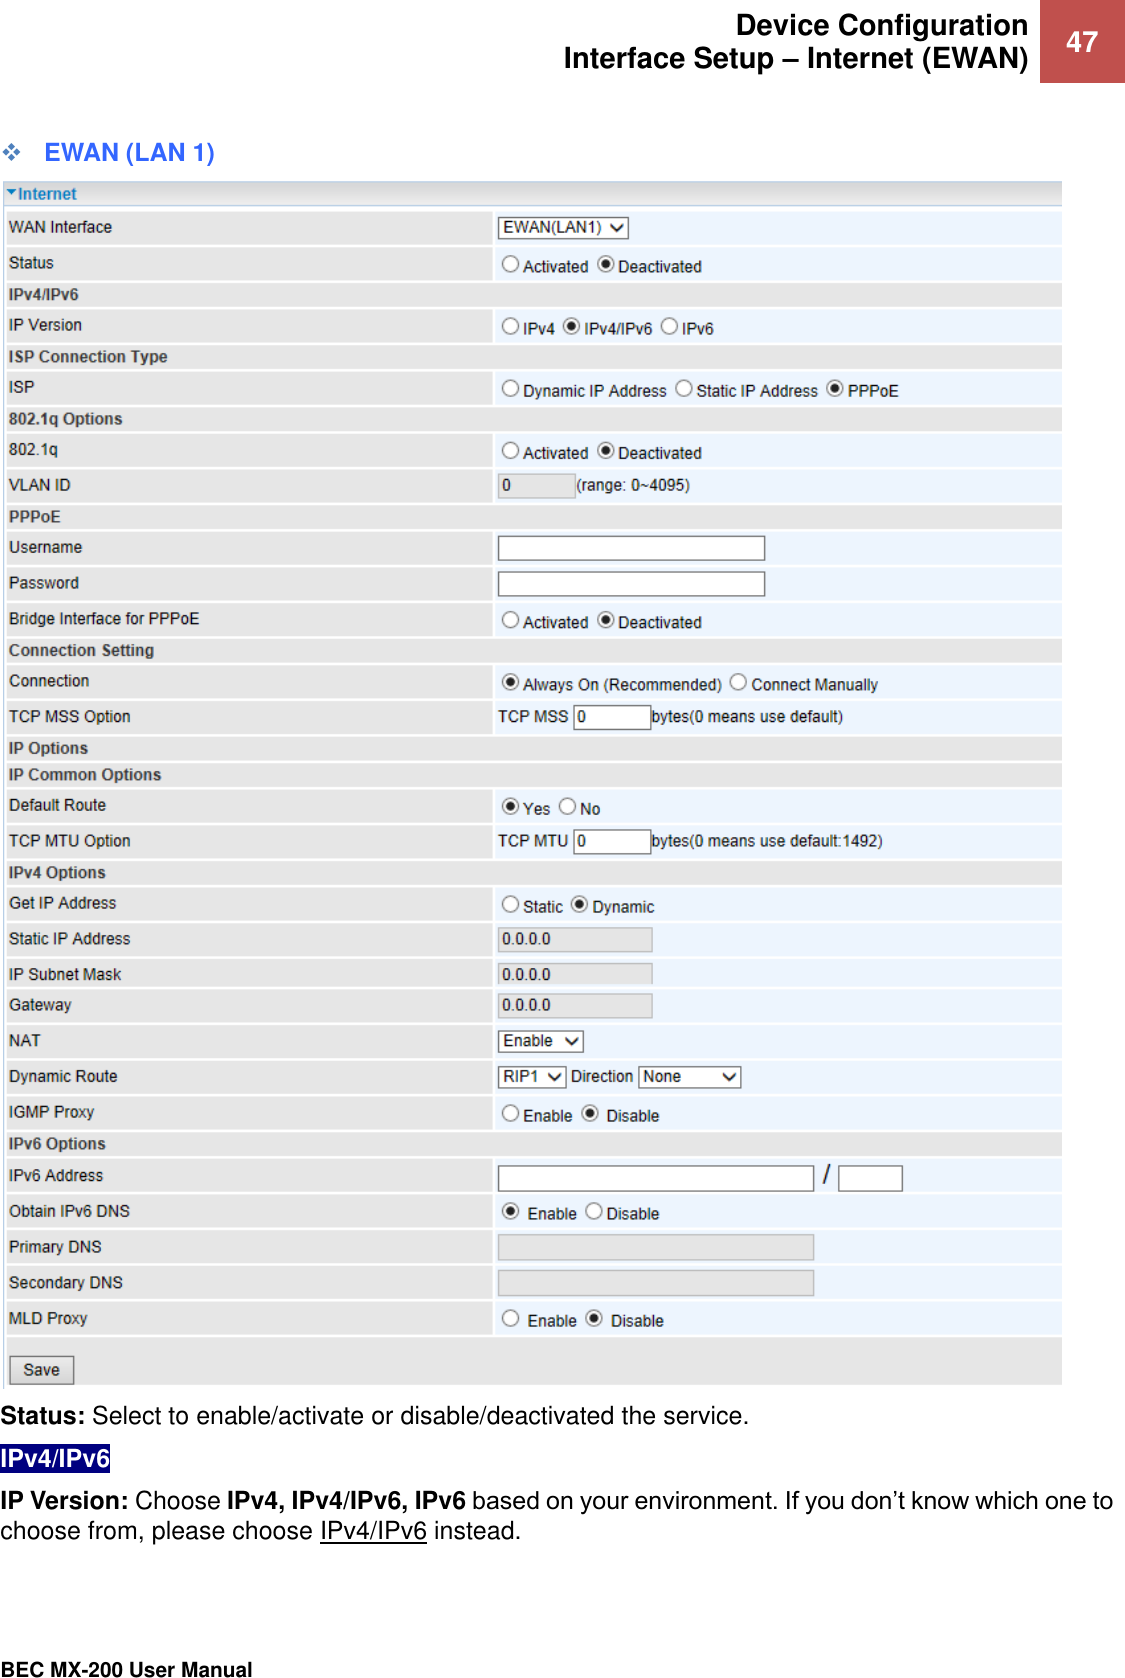 Device Configuration Interface Setup – Internet (EWAN) 47   BEC MX-200 User Manual   EWAN (LAN 1)  Status: Select to enable/activate or disable/deactivated the service. IPv4/IPv6 IP Version: Choose IPv4, IPv4/IPv6, IPv6 based on your environment. If you don’t know which one to choose from, please choose IPv4/IPv6 instead.  